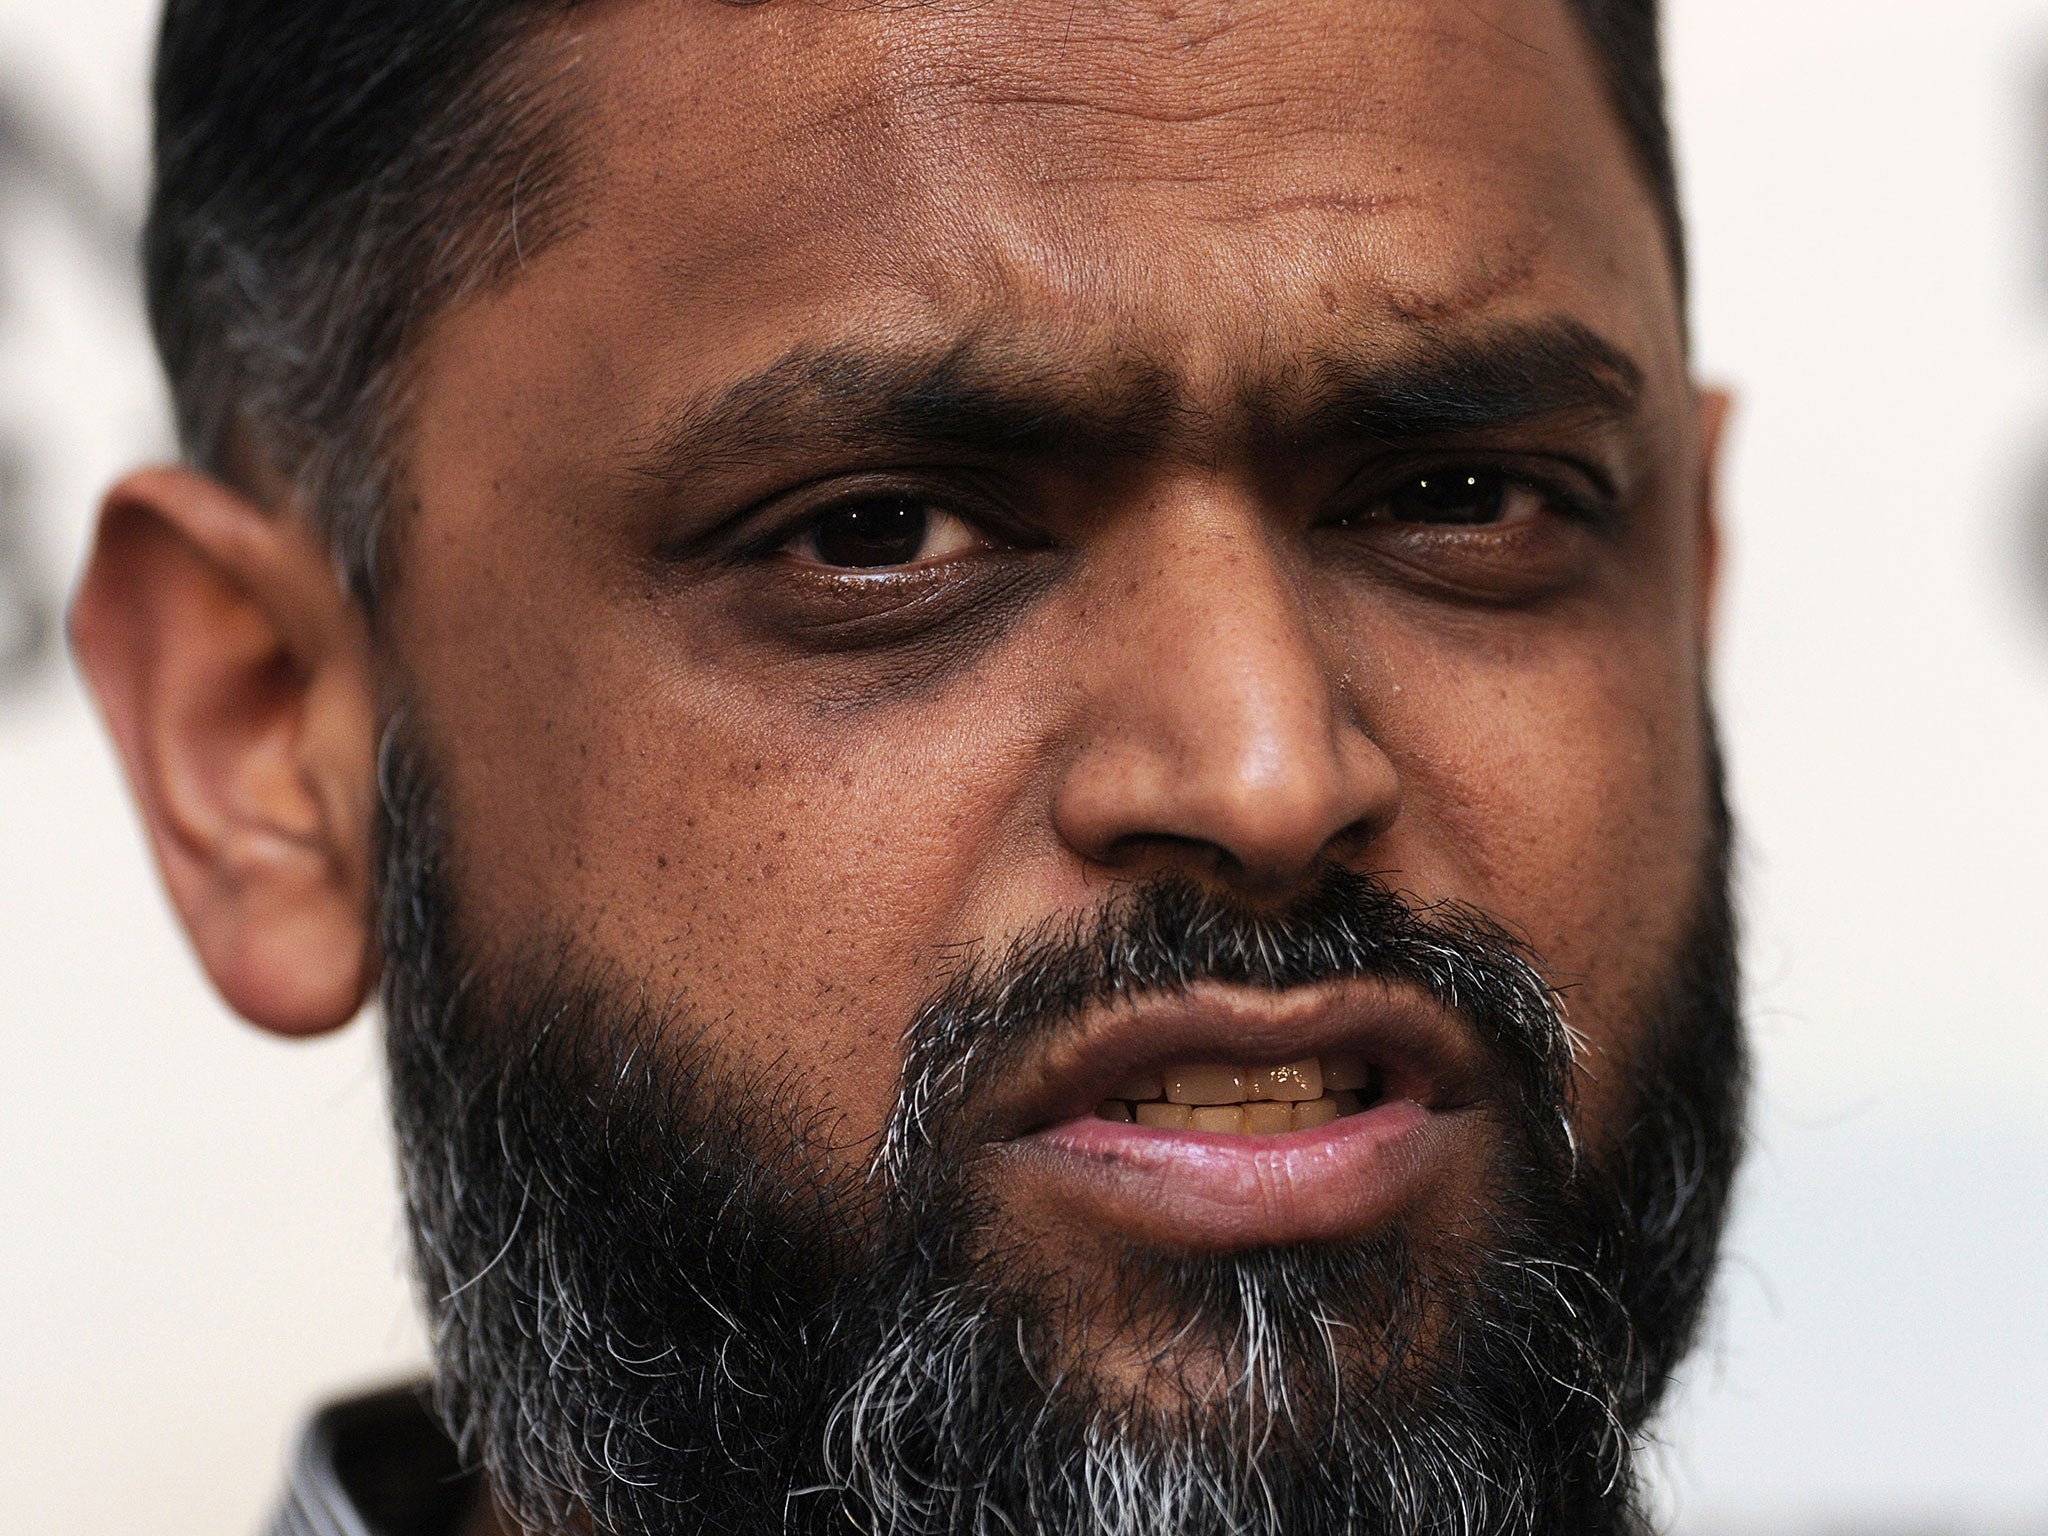 Moazzam Begg pictured in January 2012